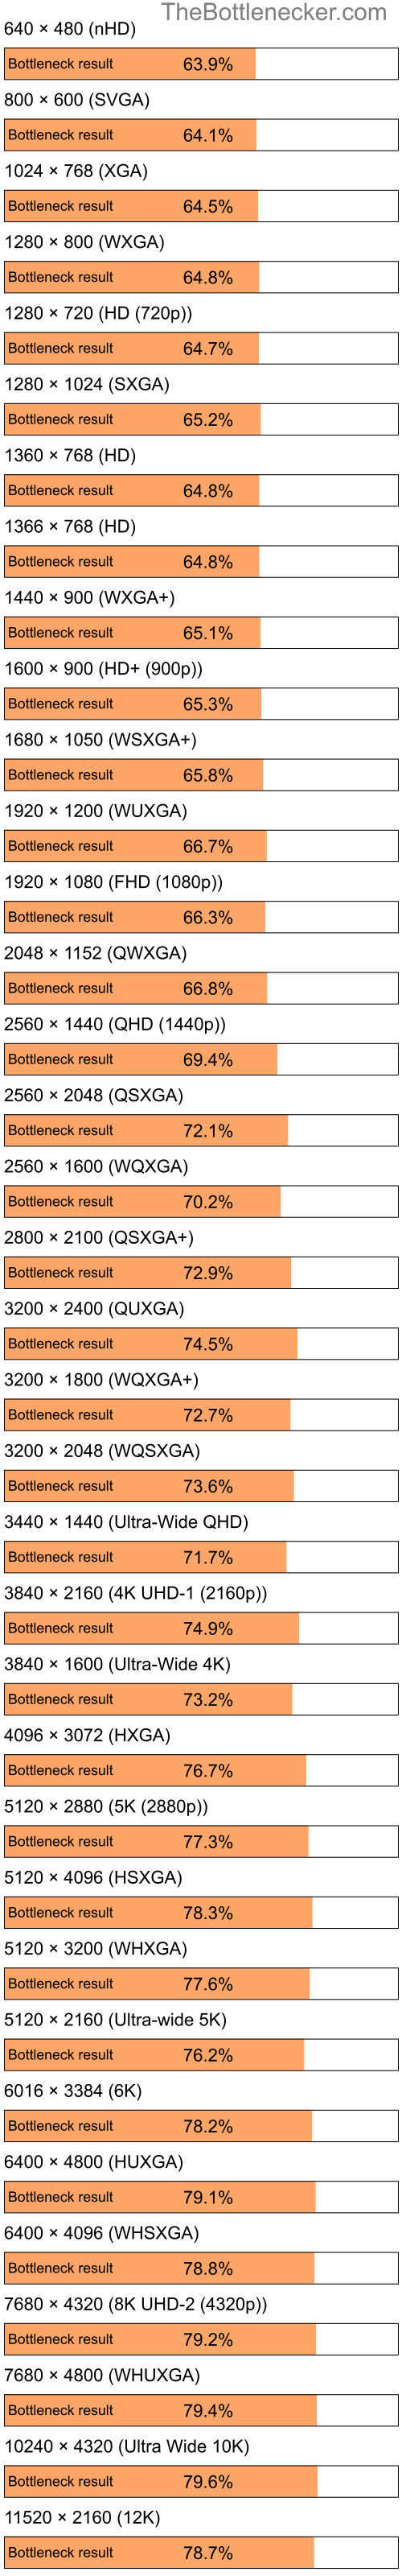 Bottleneck results by resolution for Intel Atom Z520 and NVIDIA Quadro FX 360M in General Tasks